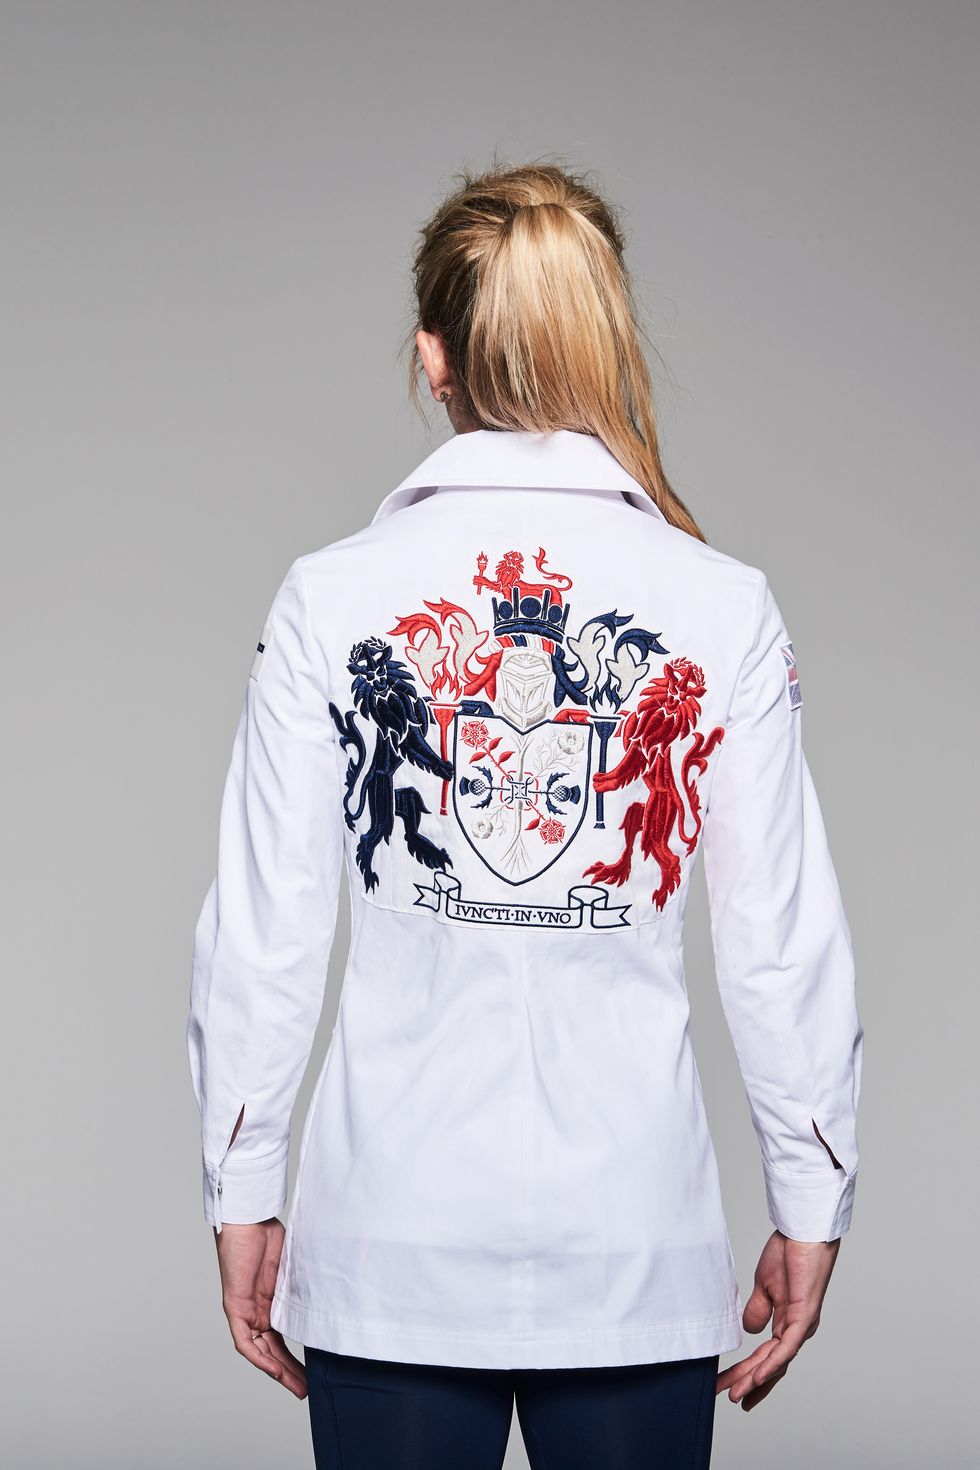 Adidas and Stella McCartney reveal the Team GB opening ceremony kit